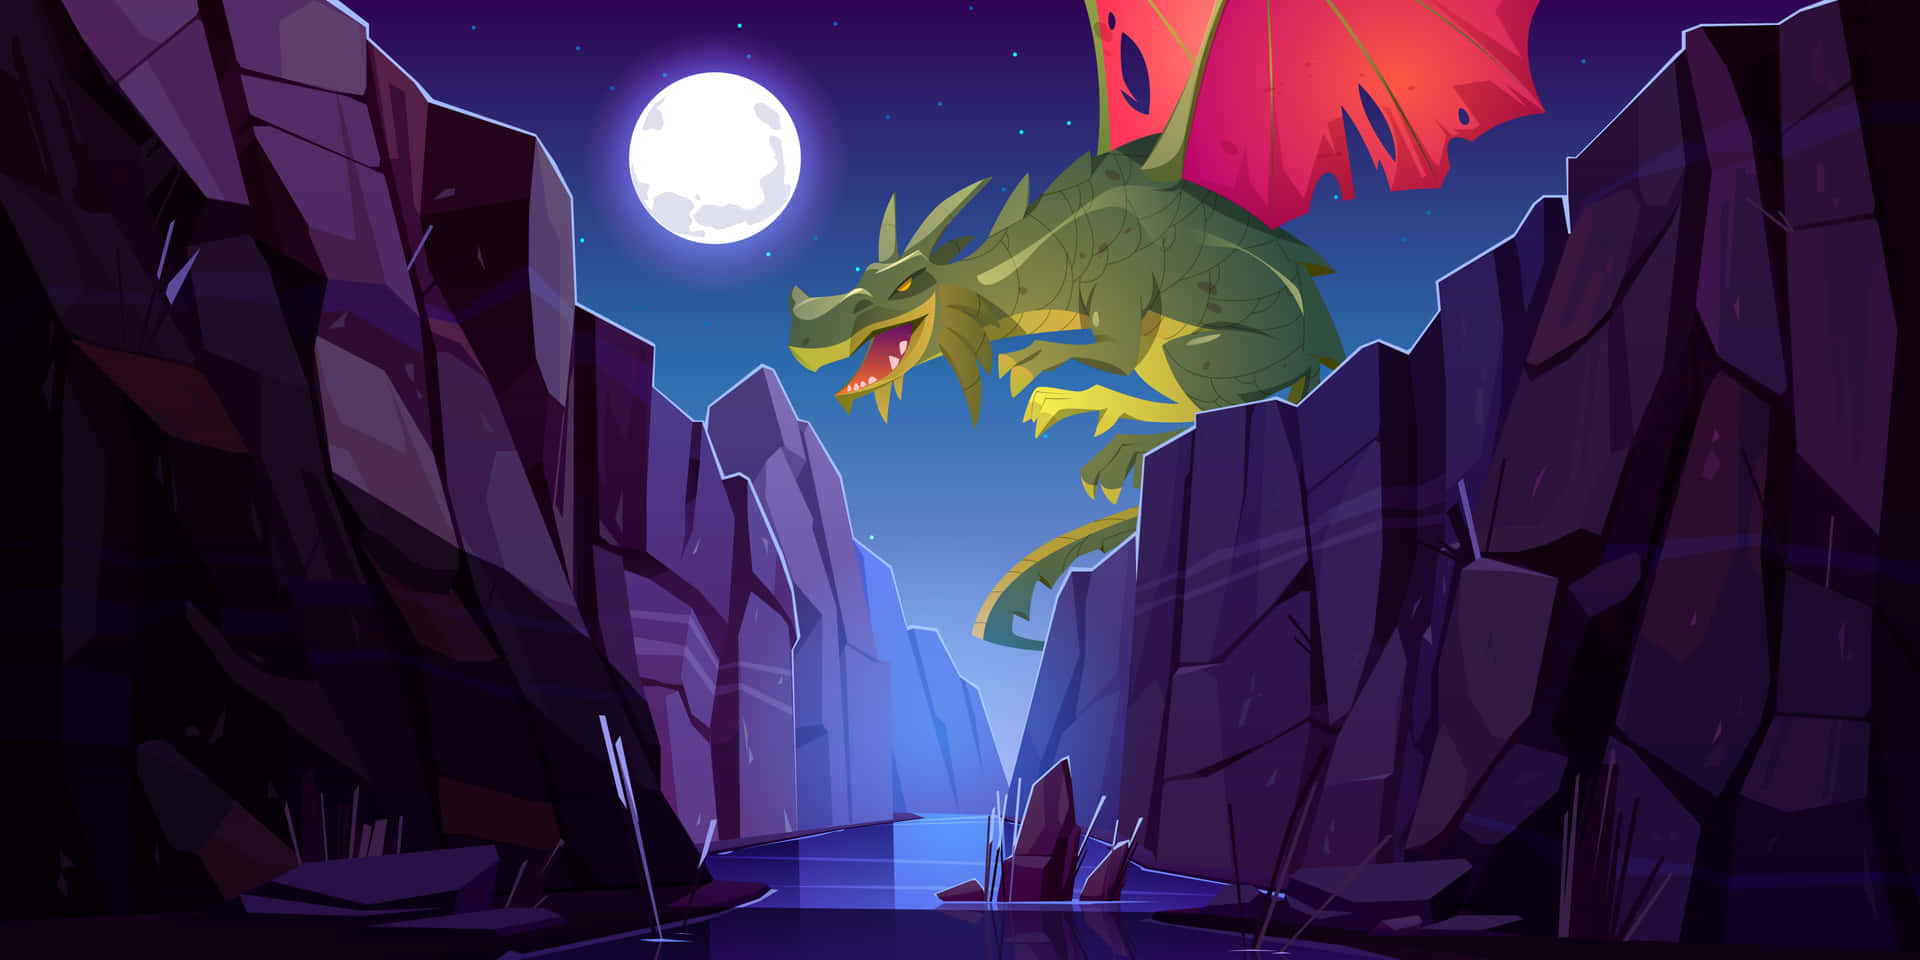 A majestic dragon takes flight in a mysterious and magical world.